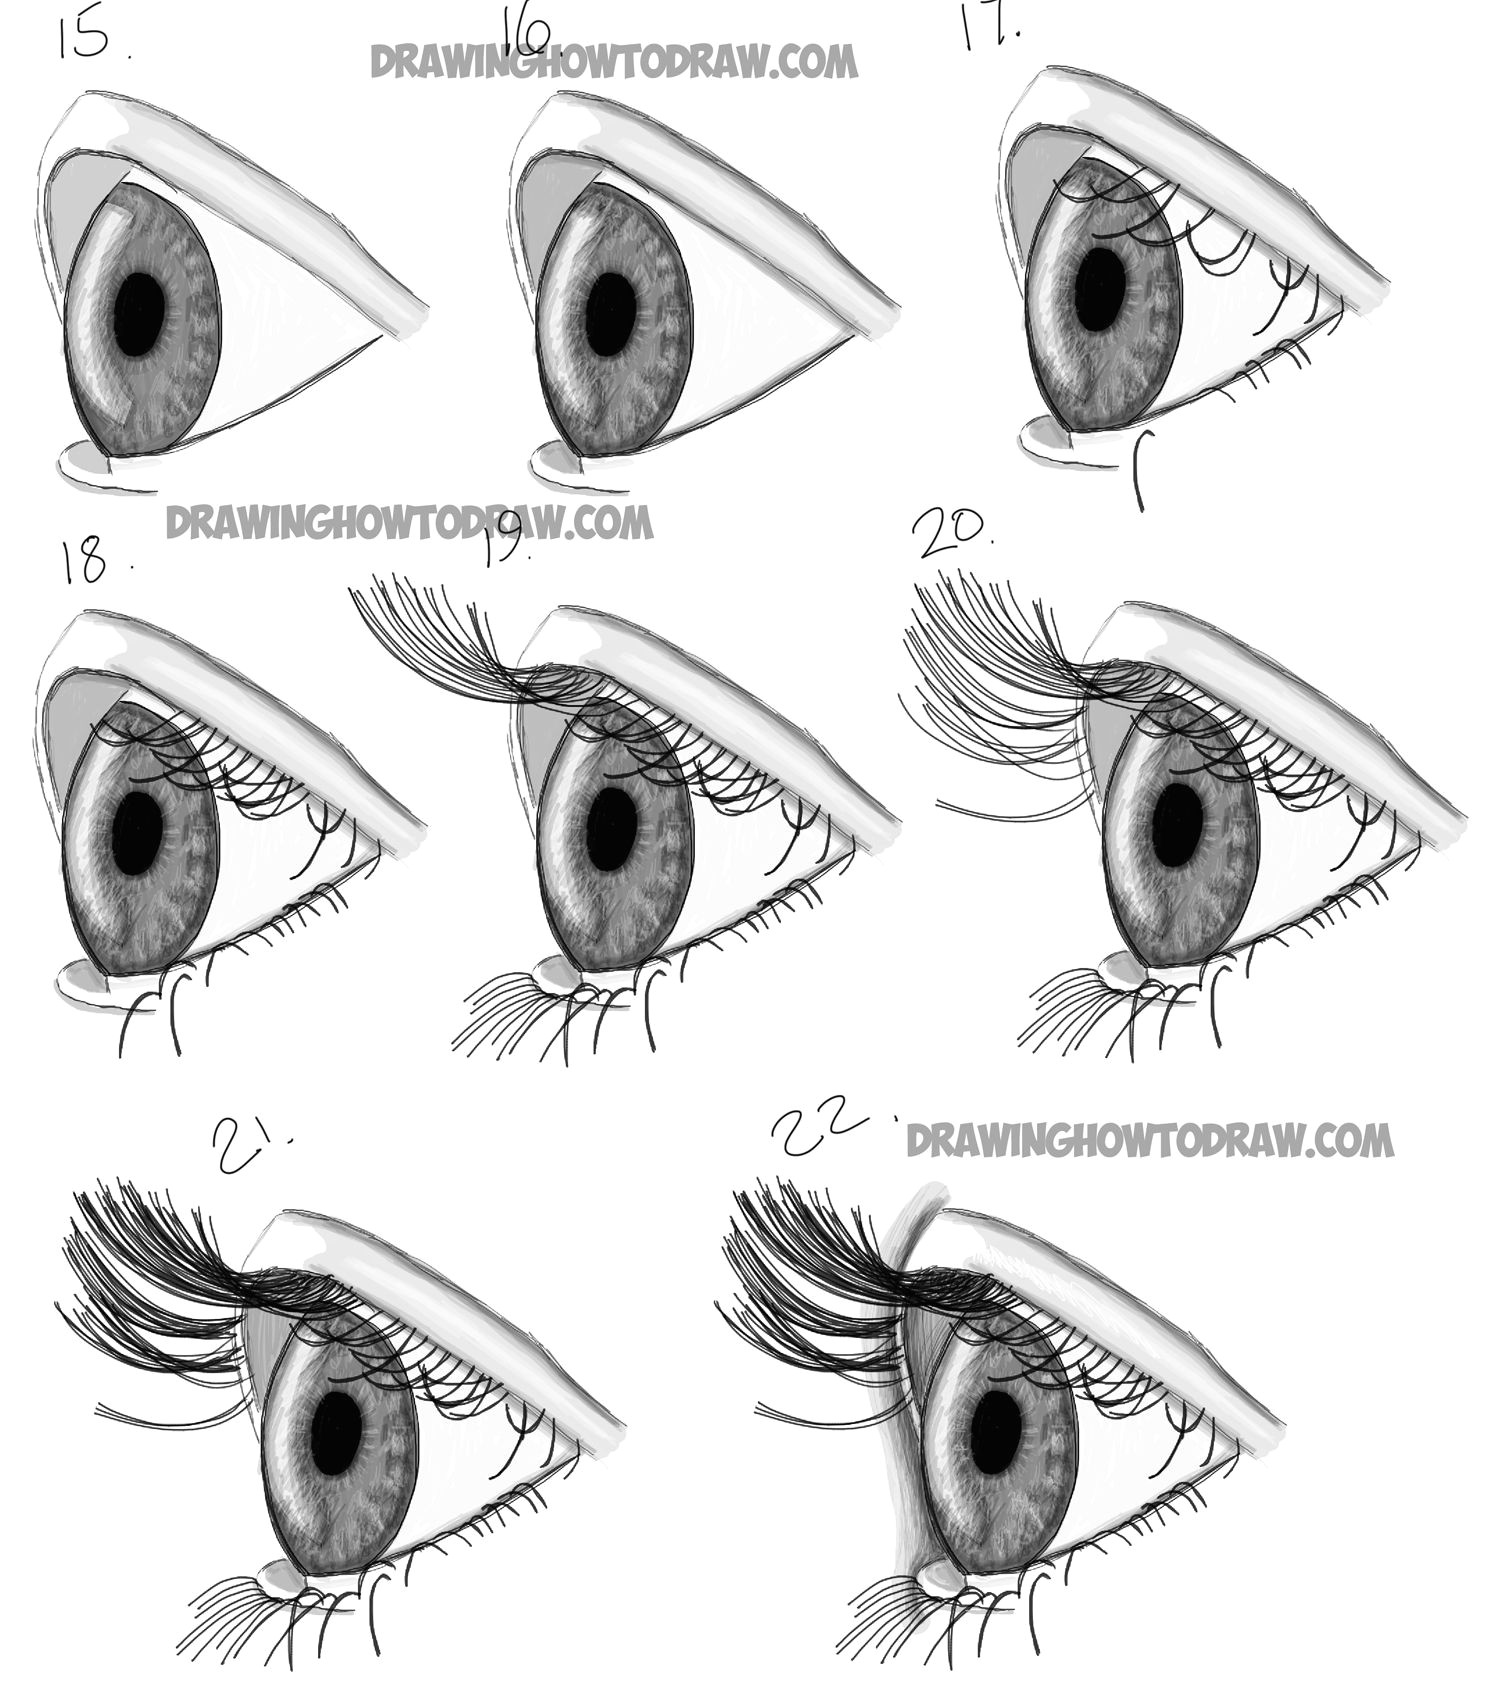 Drawing the Eyes Step by Step How to Draw Realistic Eyes From the Side Profile View Step by Step